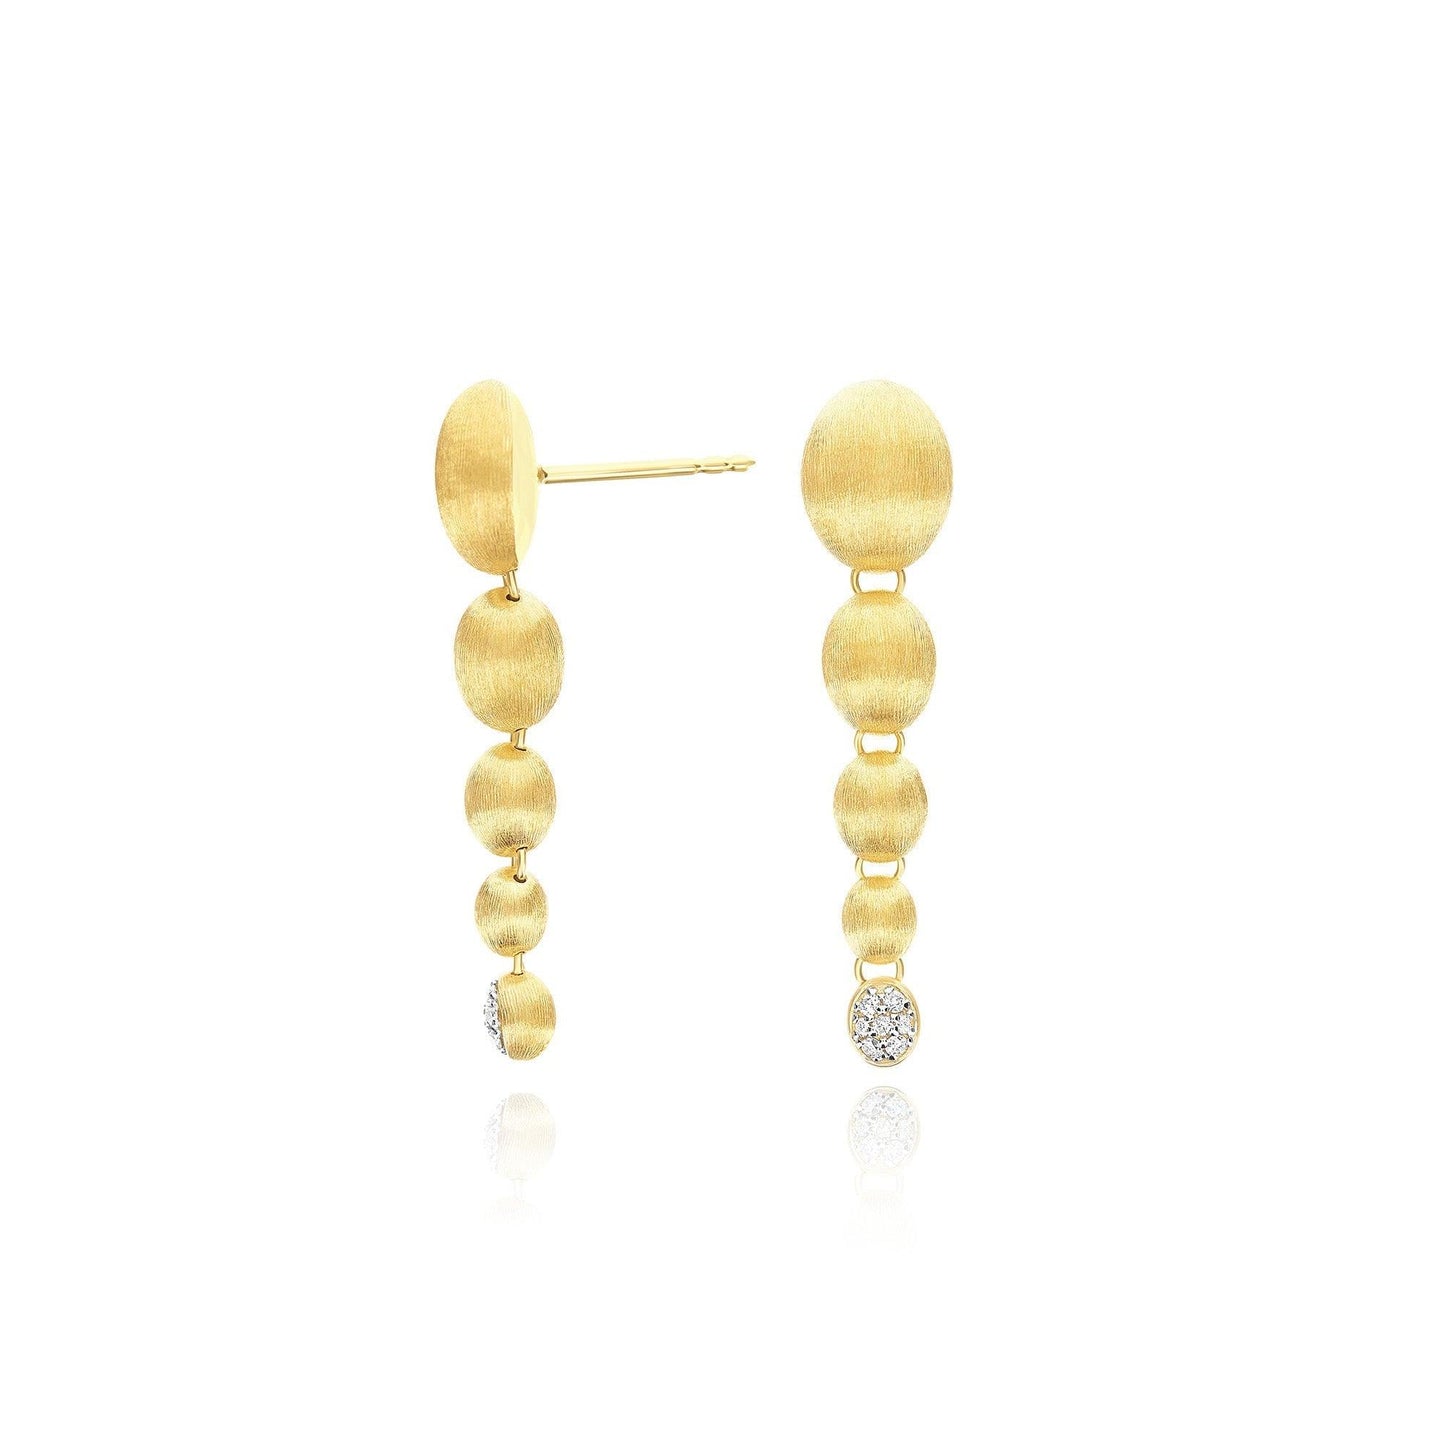 DANCING "NUVOLETTE" GOLD AND DIAMONDS CHARMING DROP EARRINGS